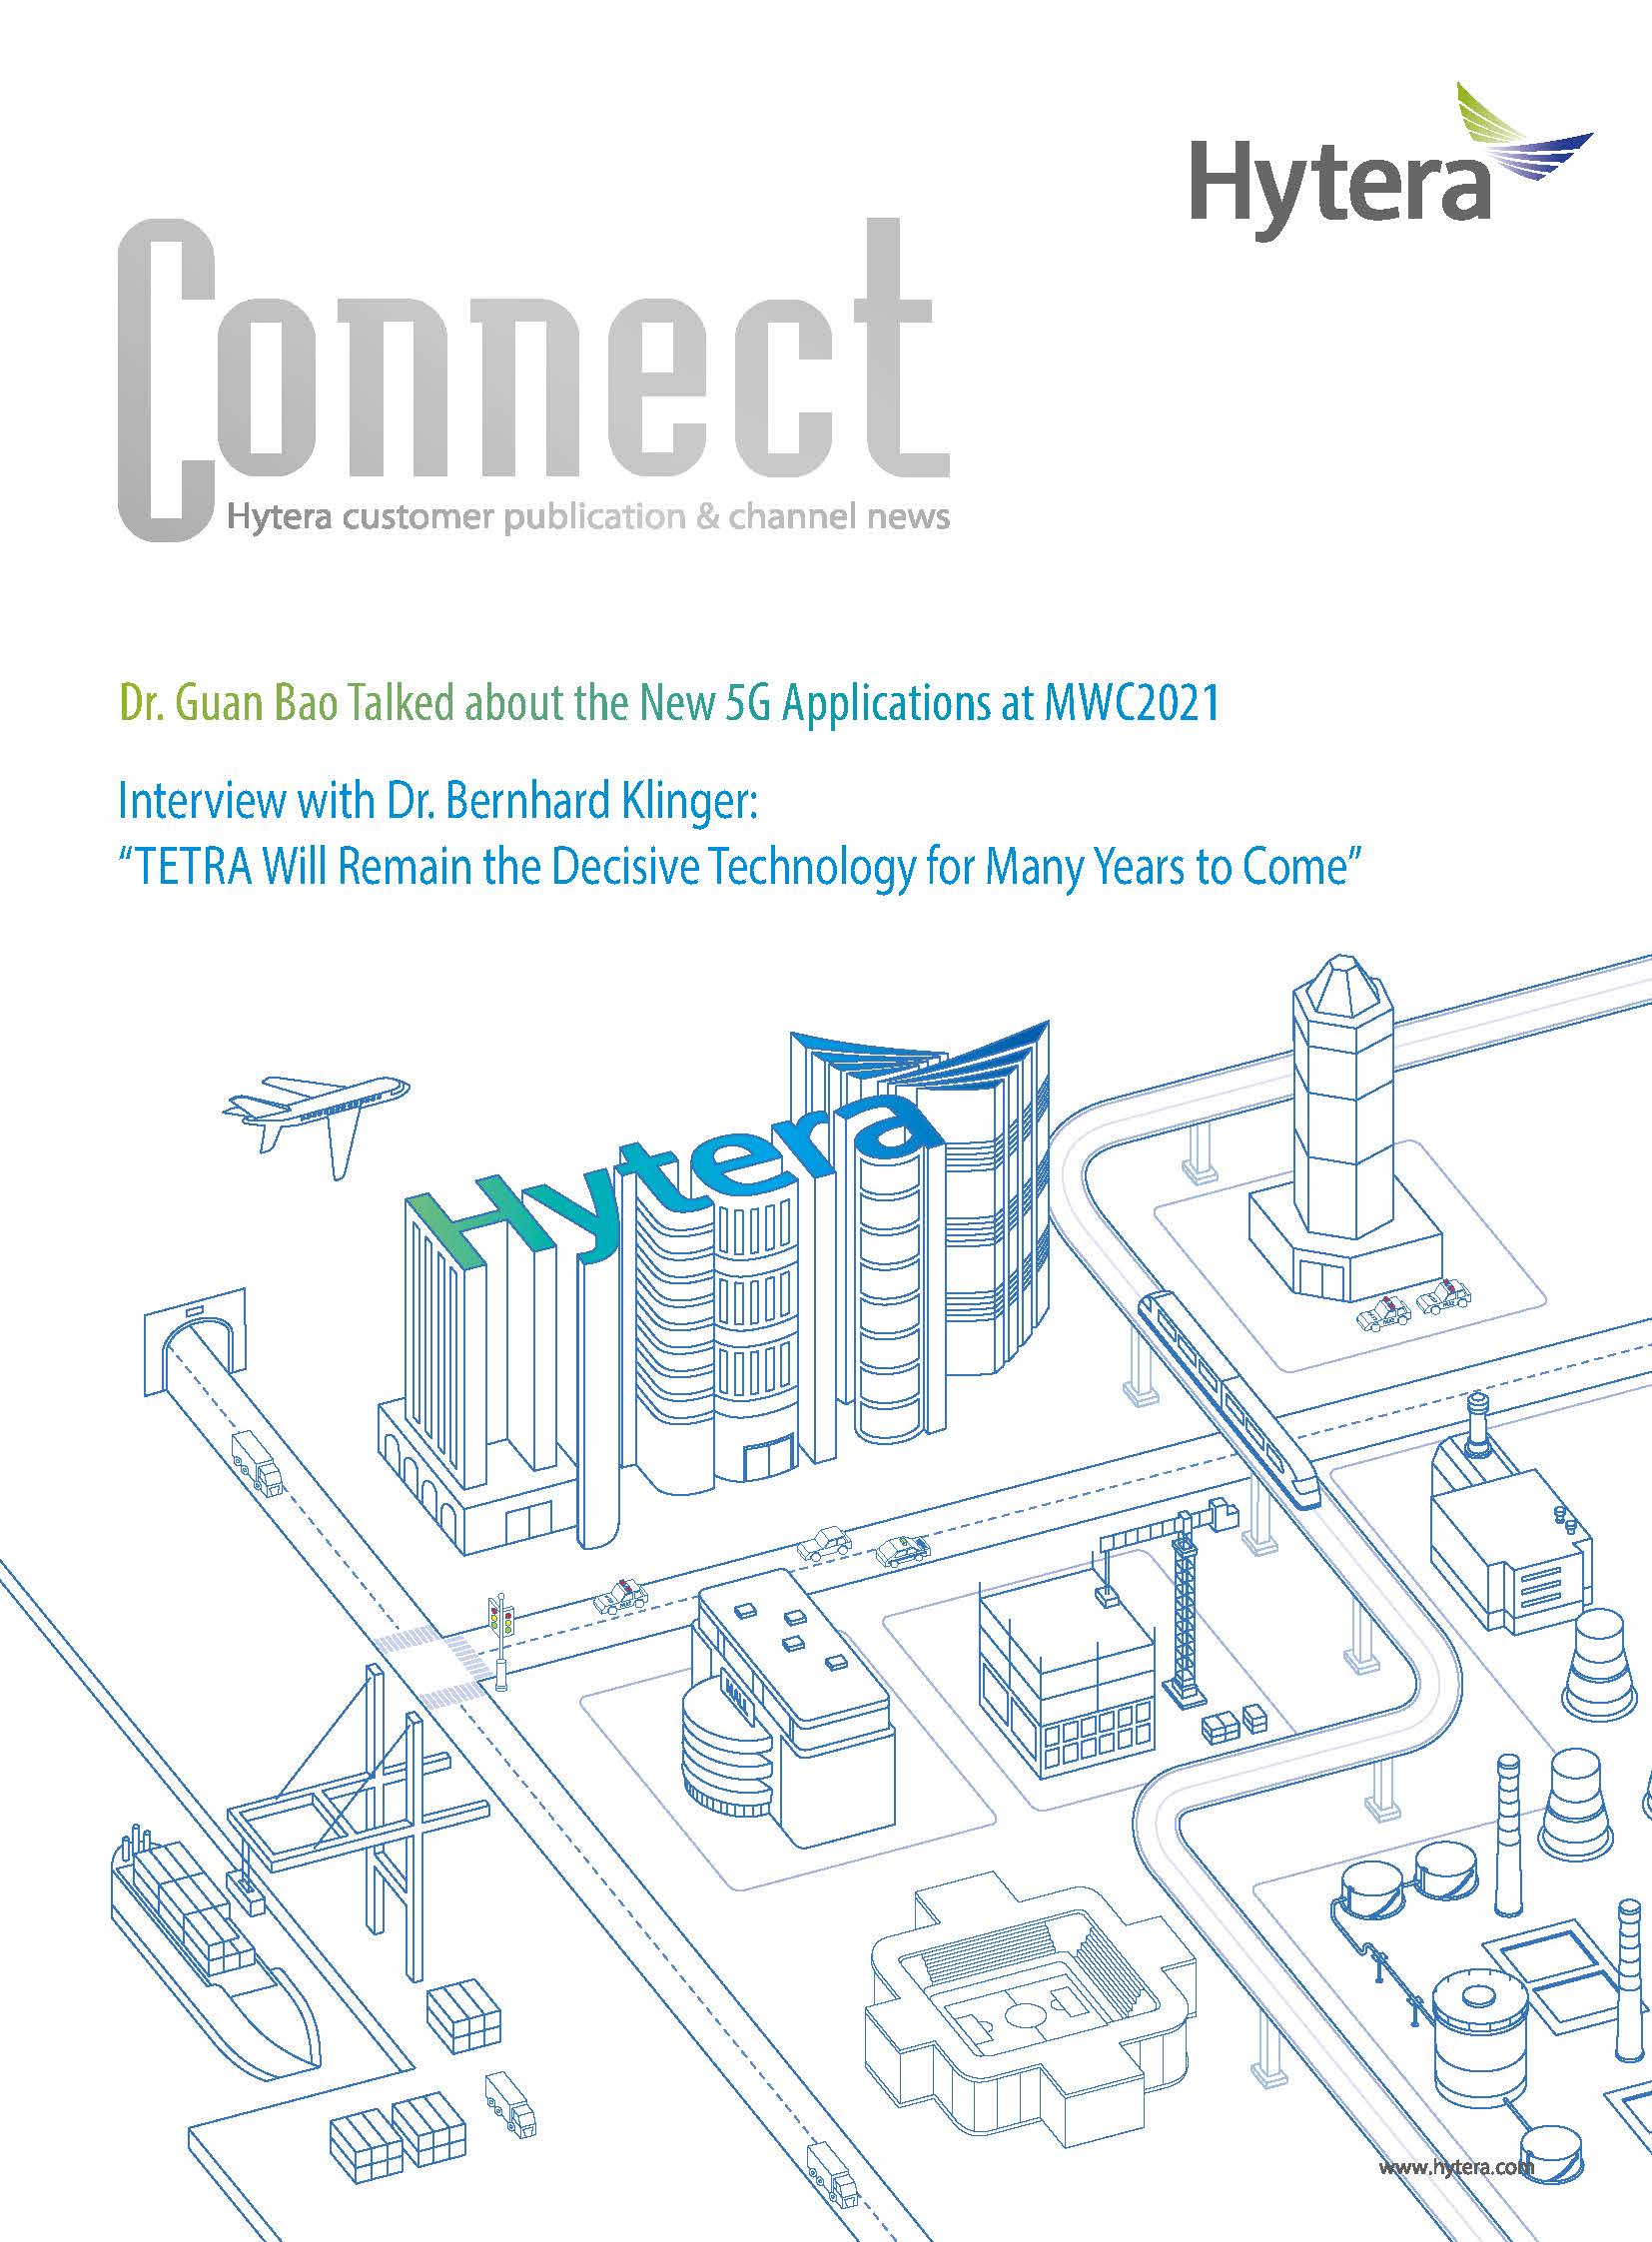 Hytera 2021 Connect Issue 1